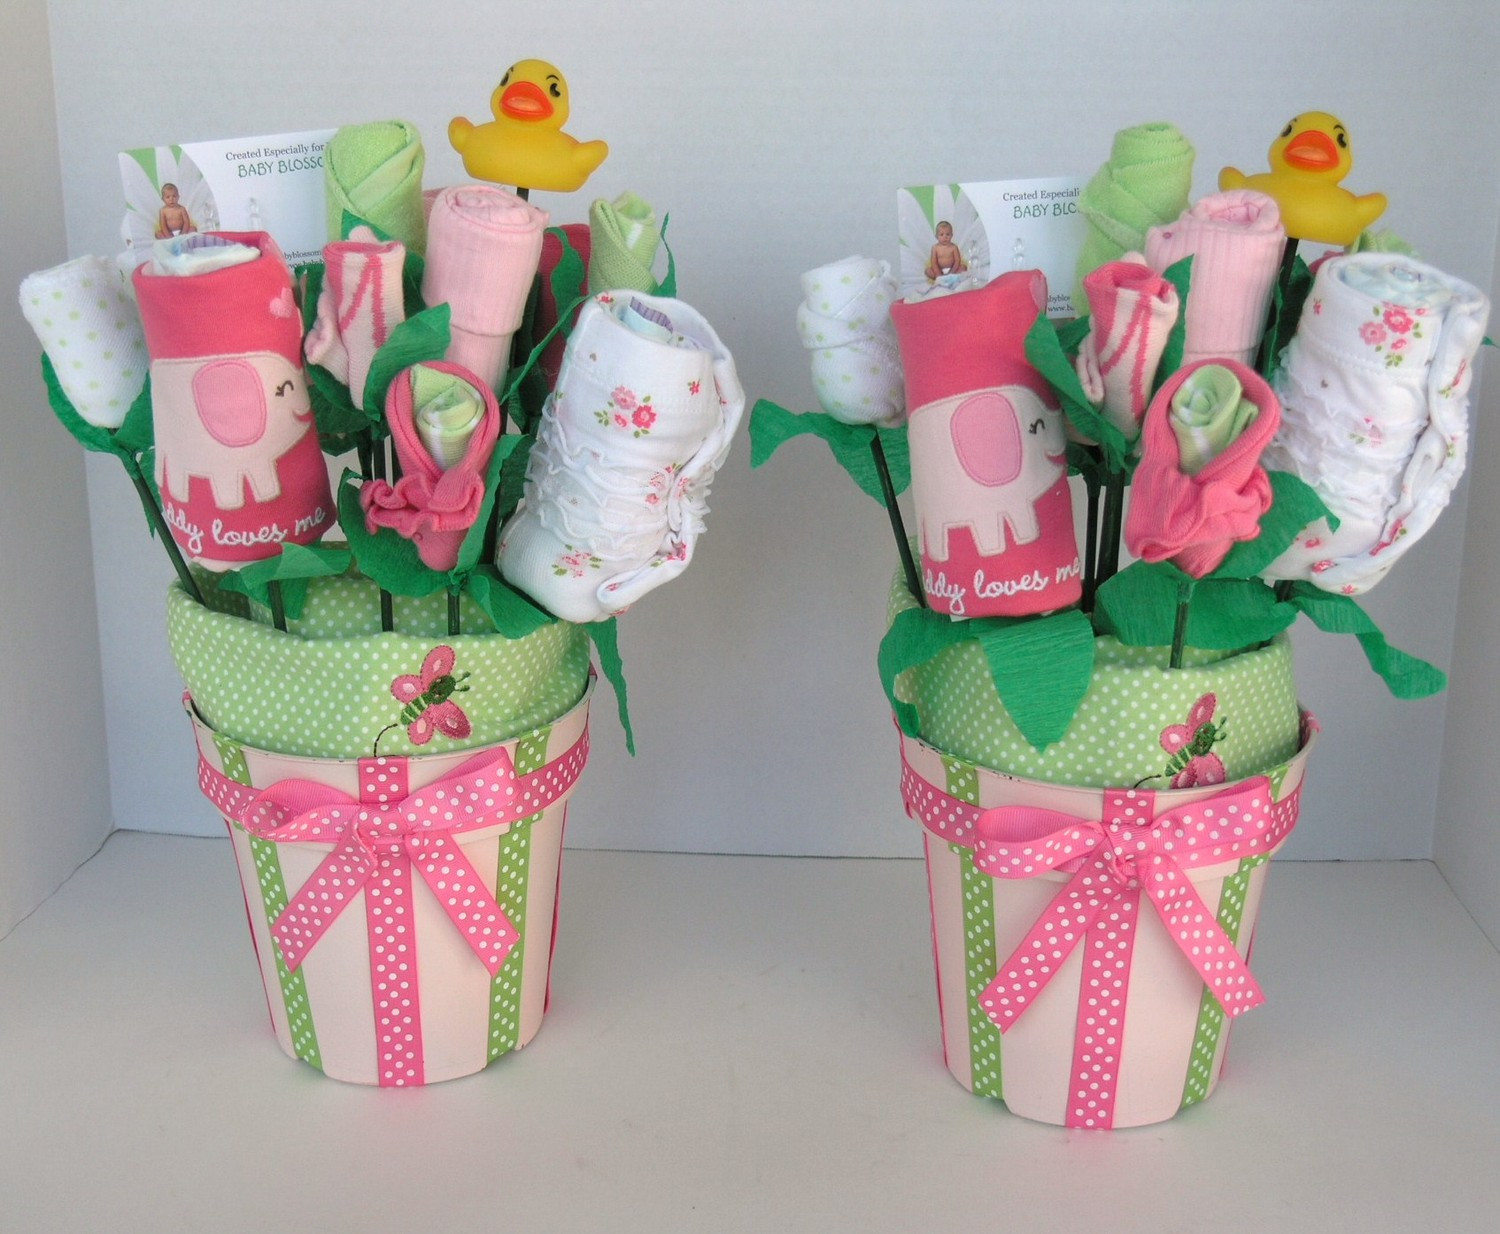 Babyshower Gift Ideas
 Five Best DIY Baby Gifting Ideas for The Little Special